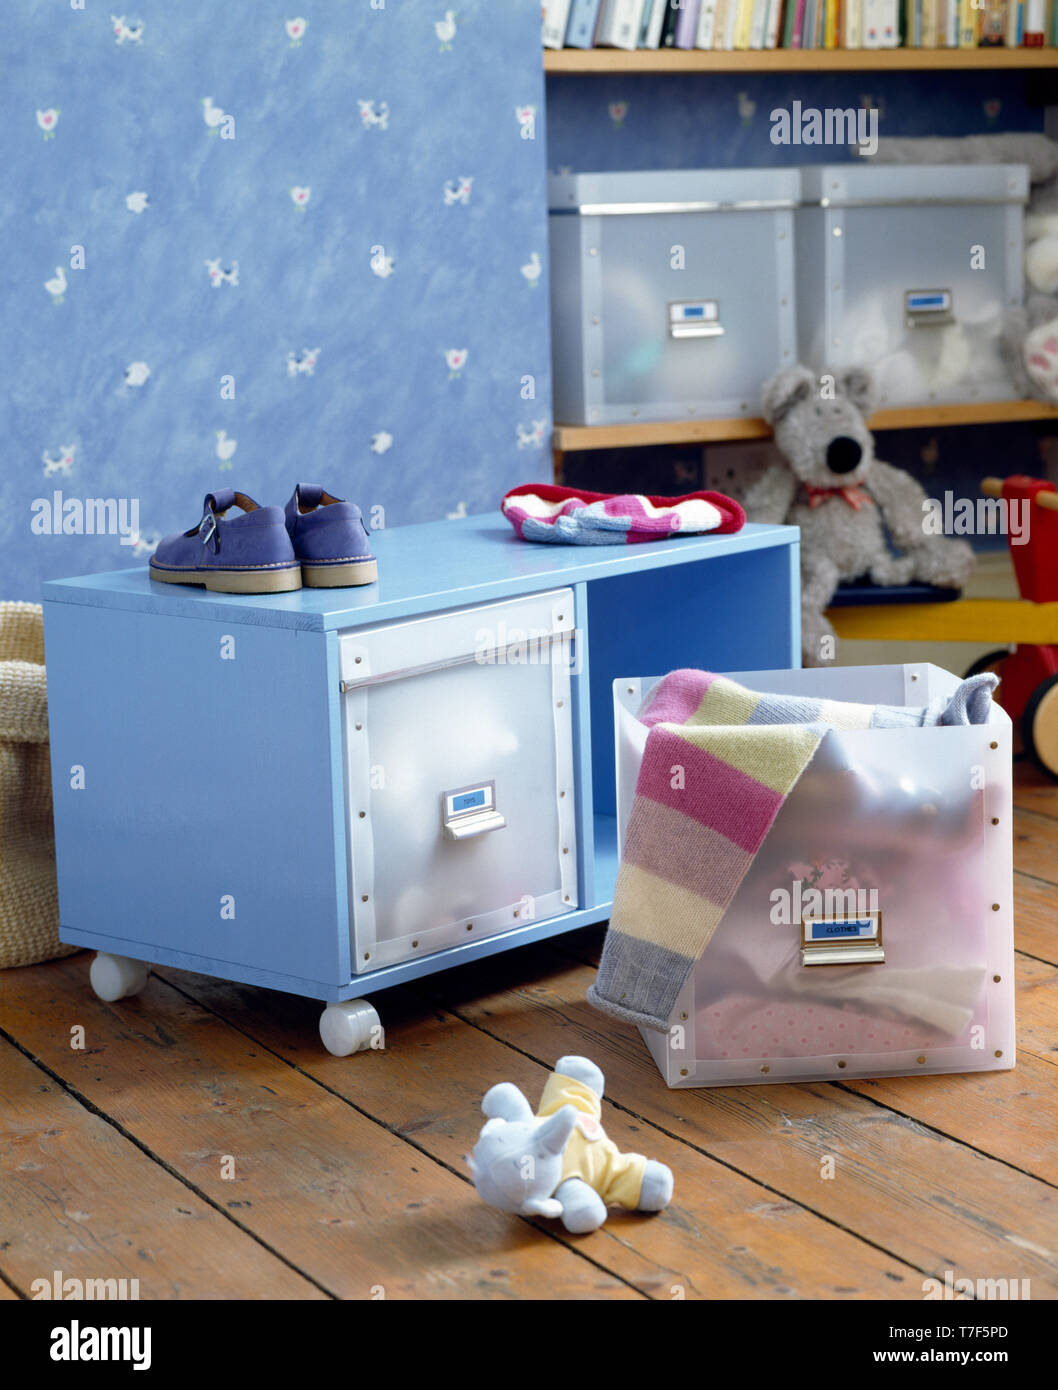 Plastic toy box beside blue cupboard on casters in play room Stock Photo